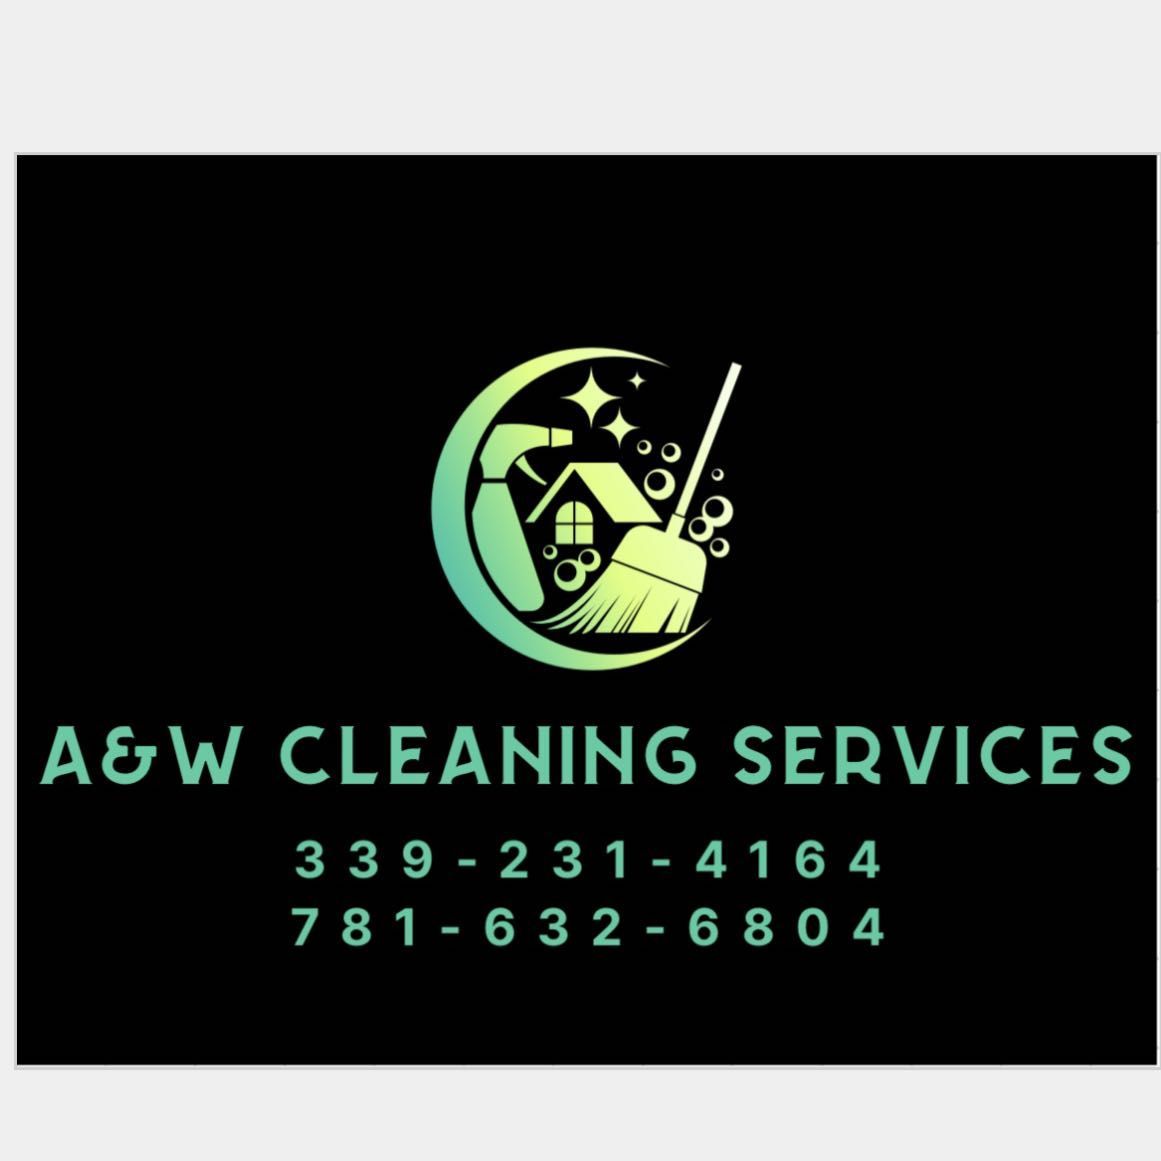 A&W cleaning services, Lynn, 01902